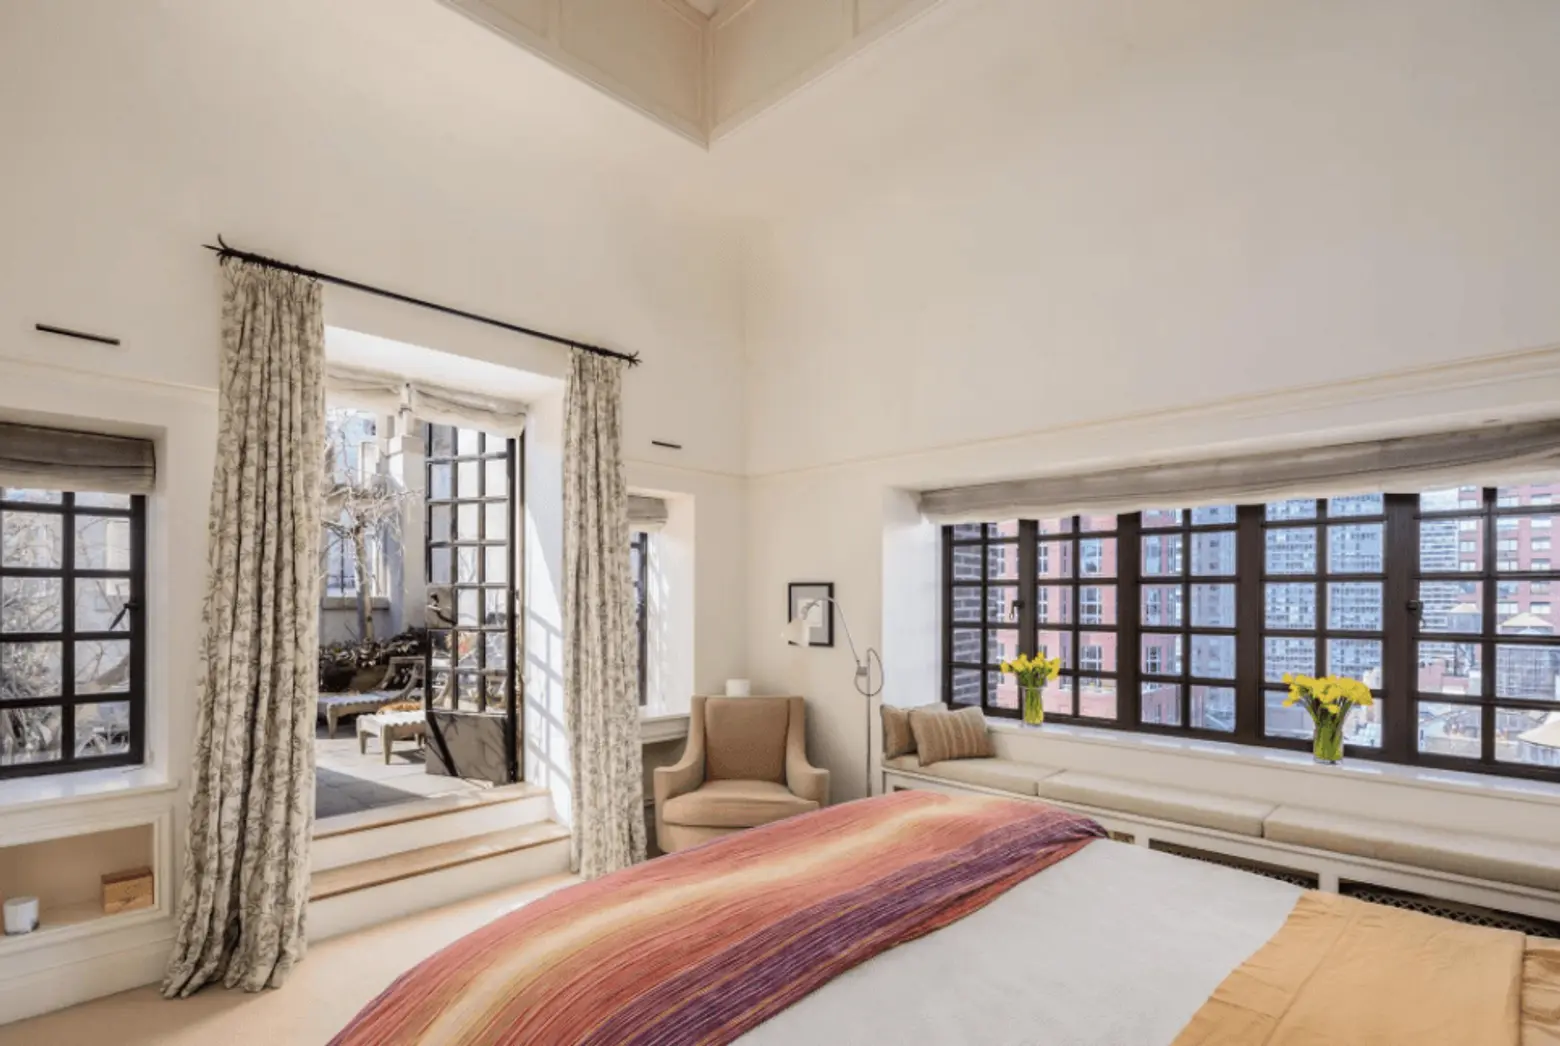 1 west 67th street, hotel des artistes, co-ops, cool listings